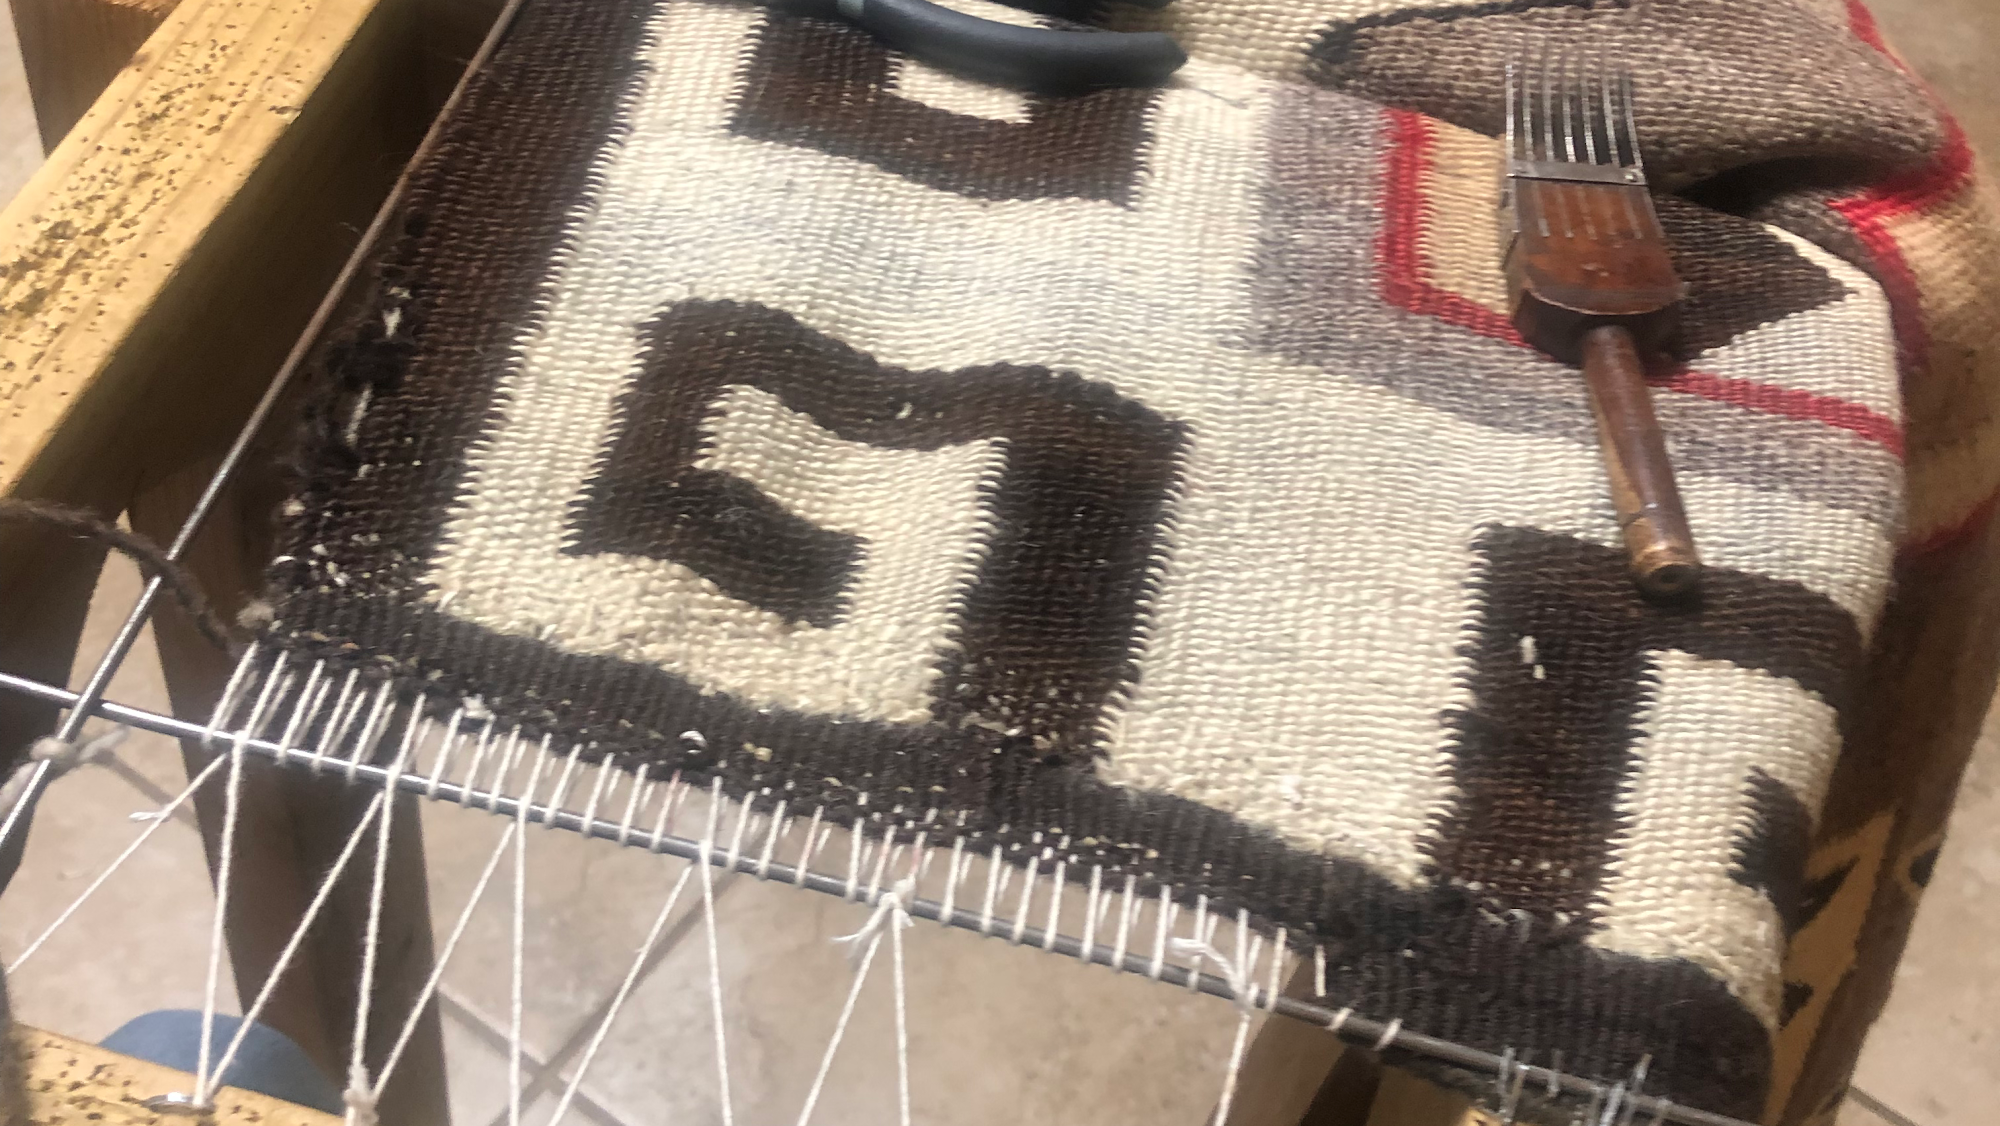 Rug Repair & Restoration | Specialty Rugs in New Mexico USA